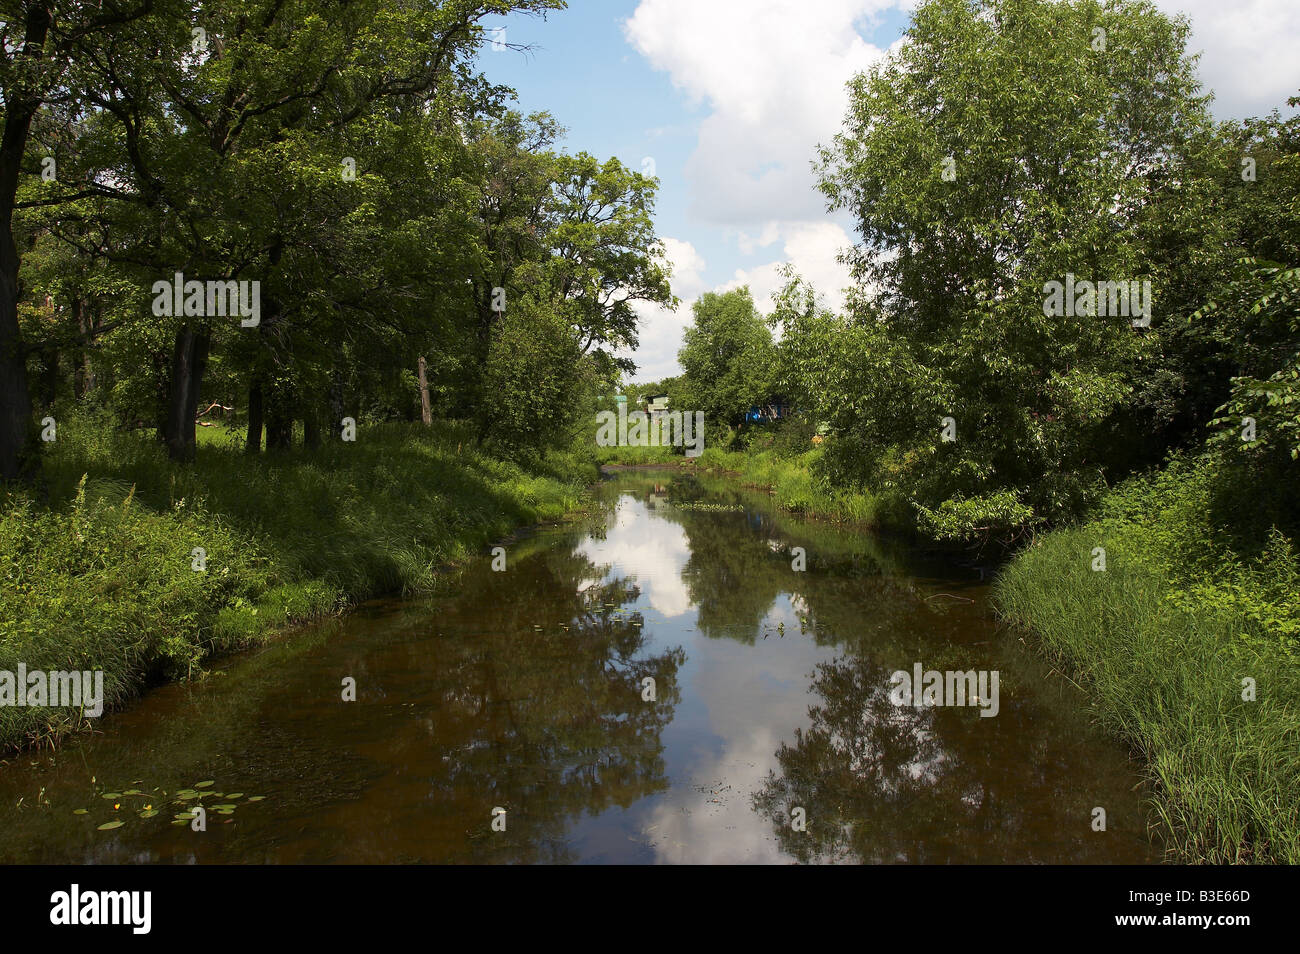 The river in village Stock Photo